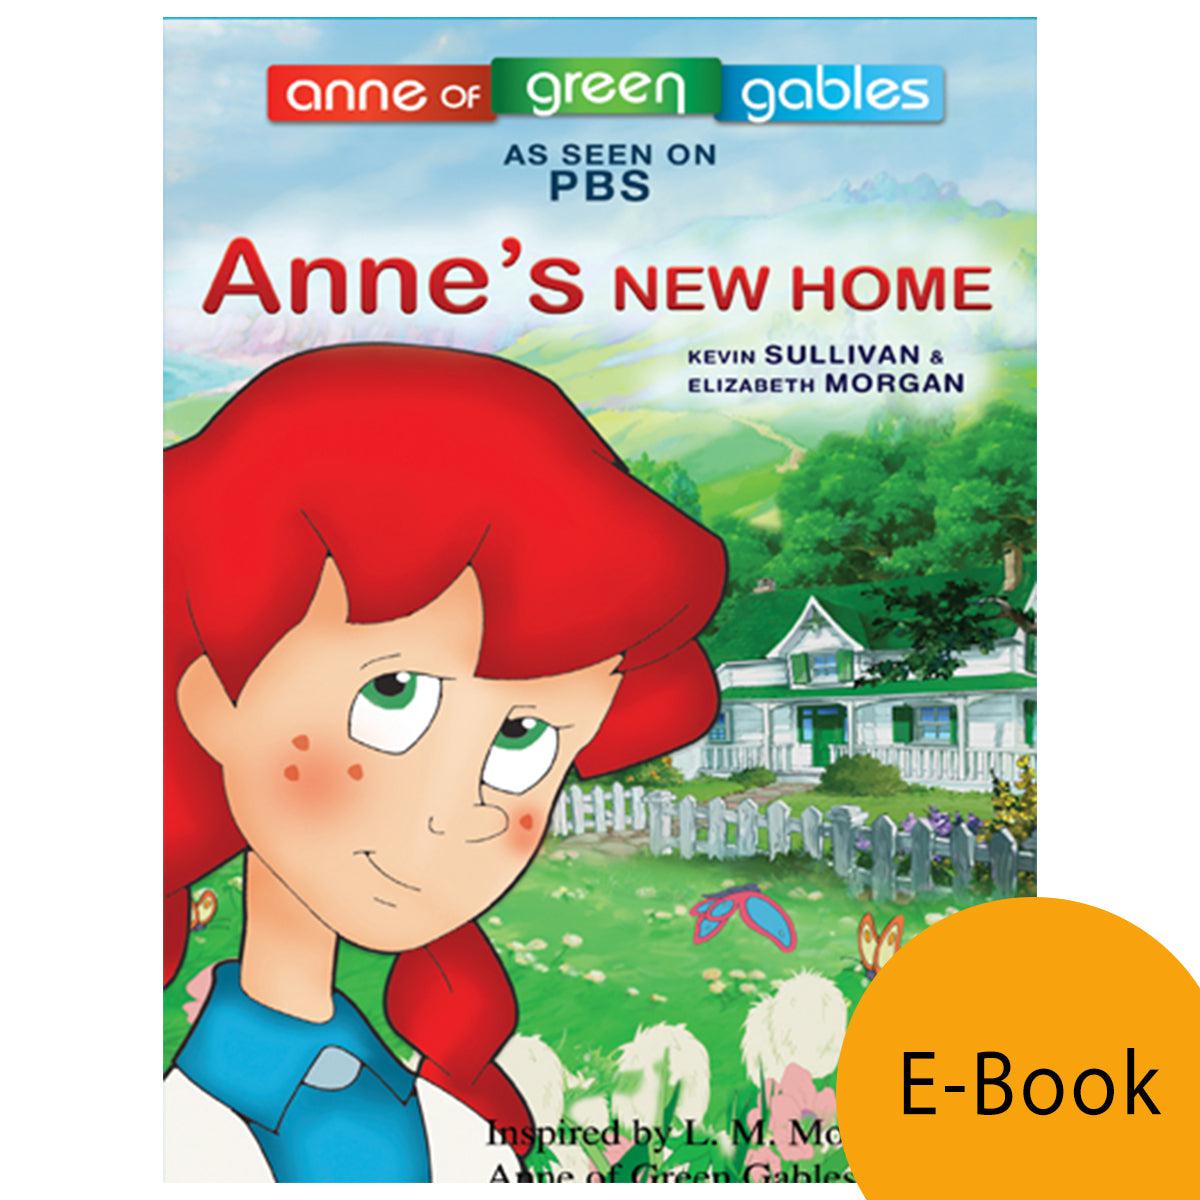 Anne: The Animated Series - Anne's New Home LEVEL 1 (eBook)